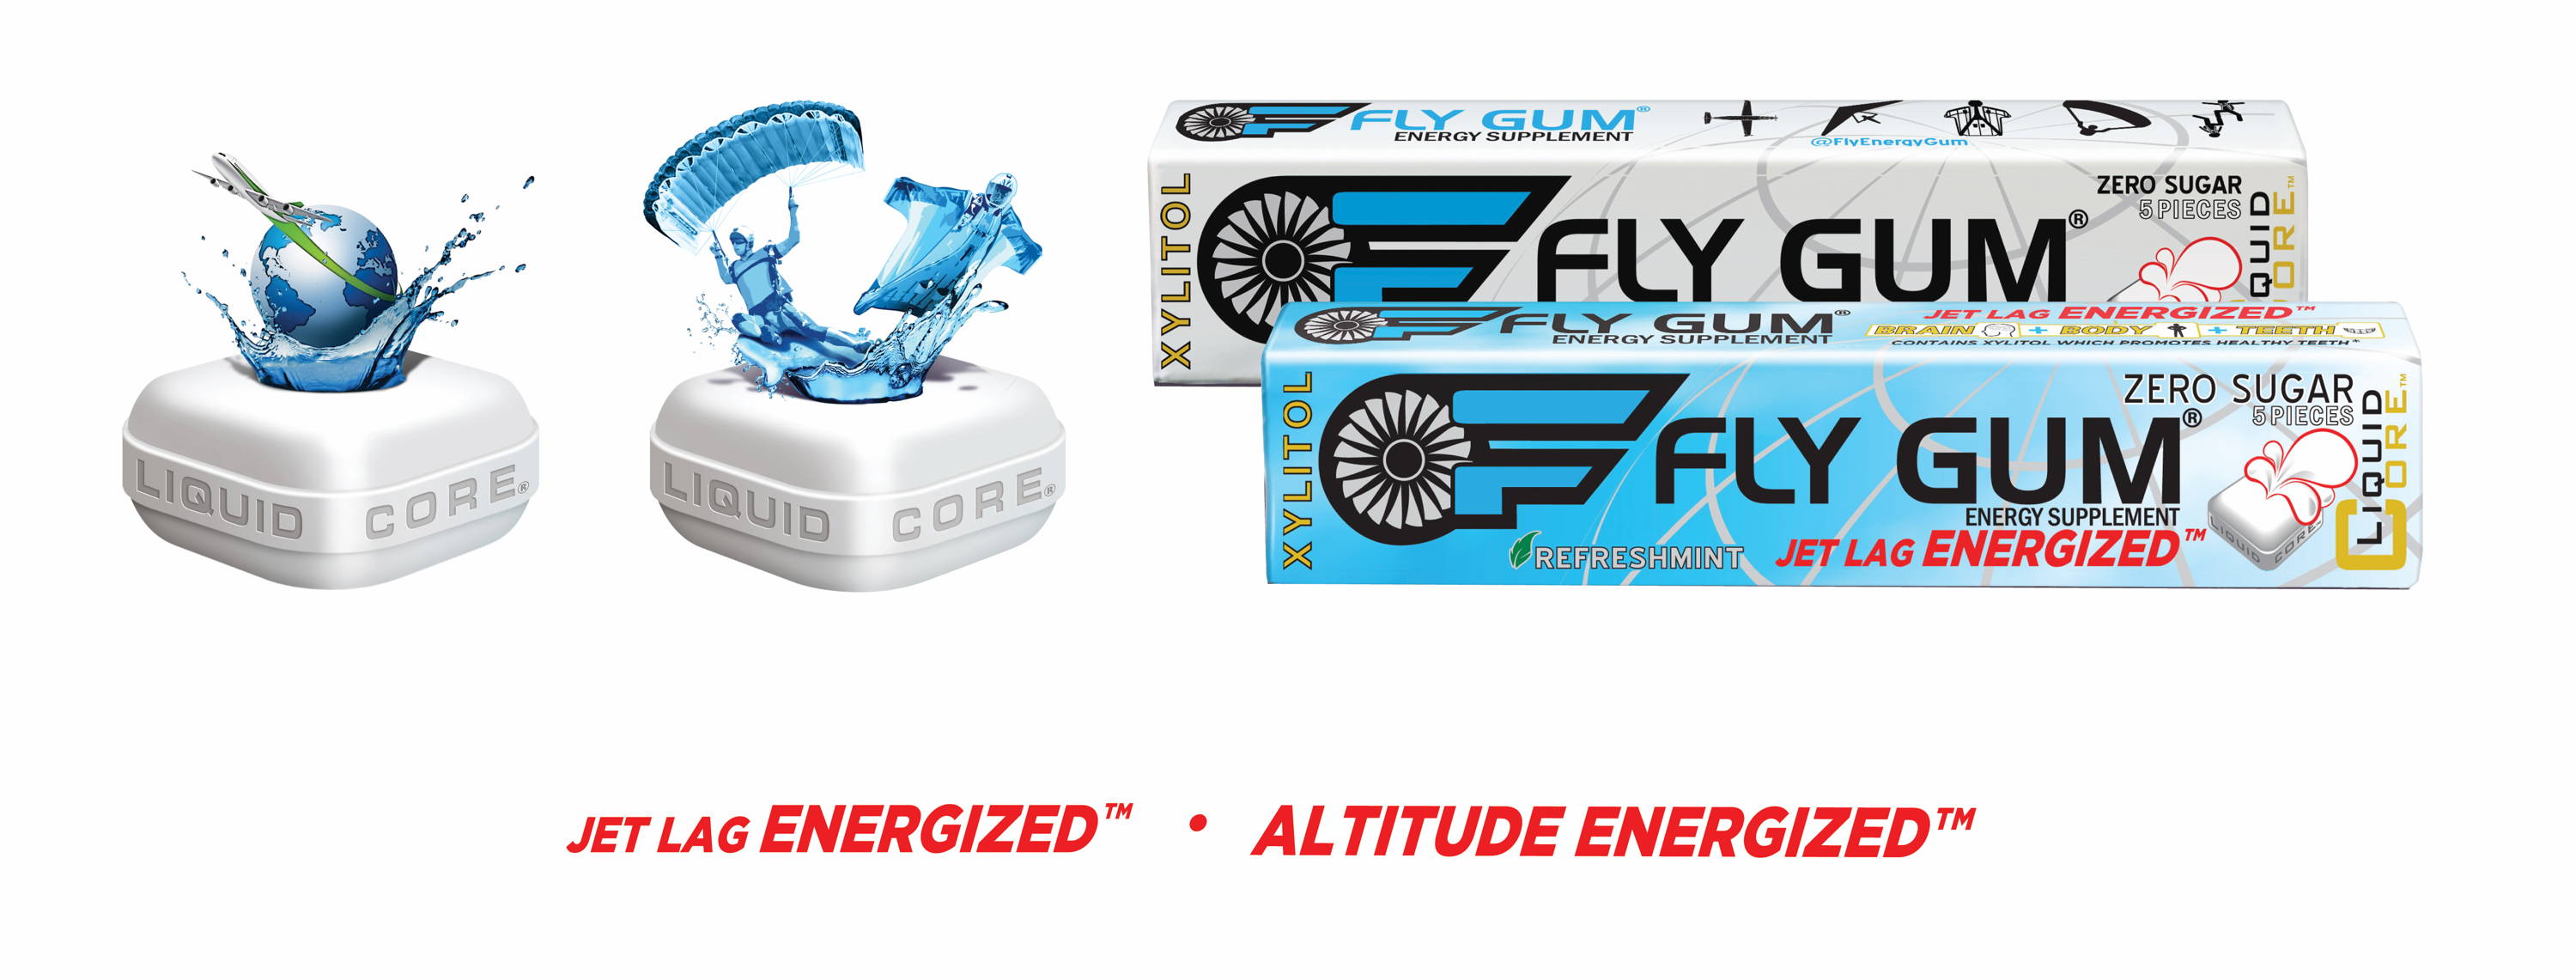 Fly Gum Packs and liquid forms with flying